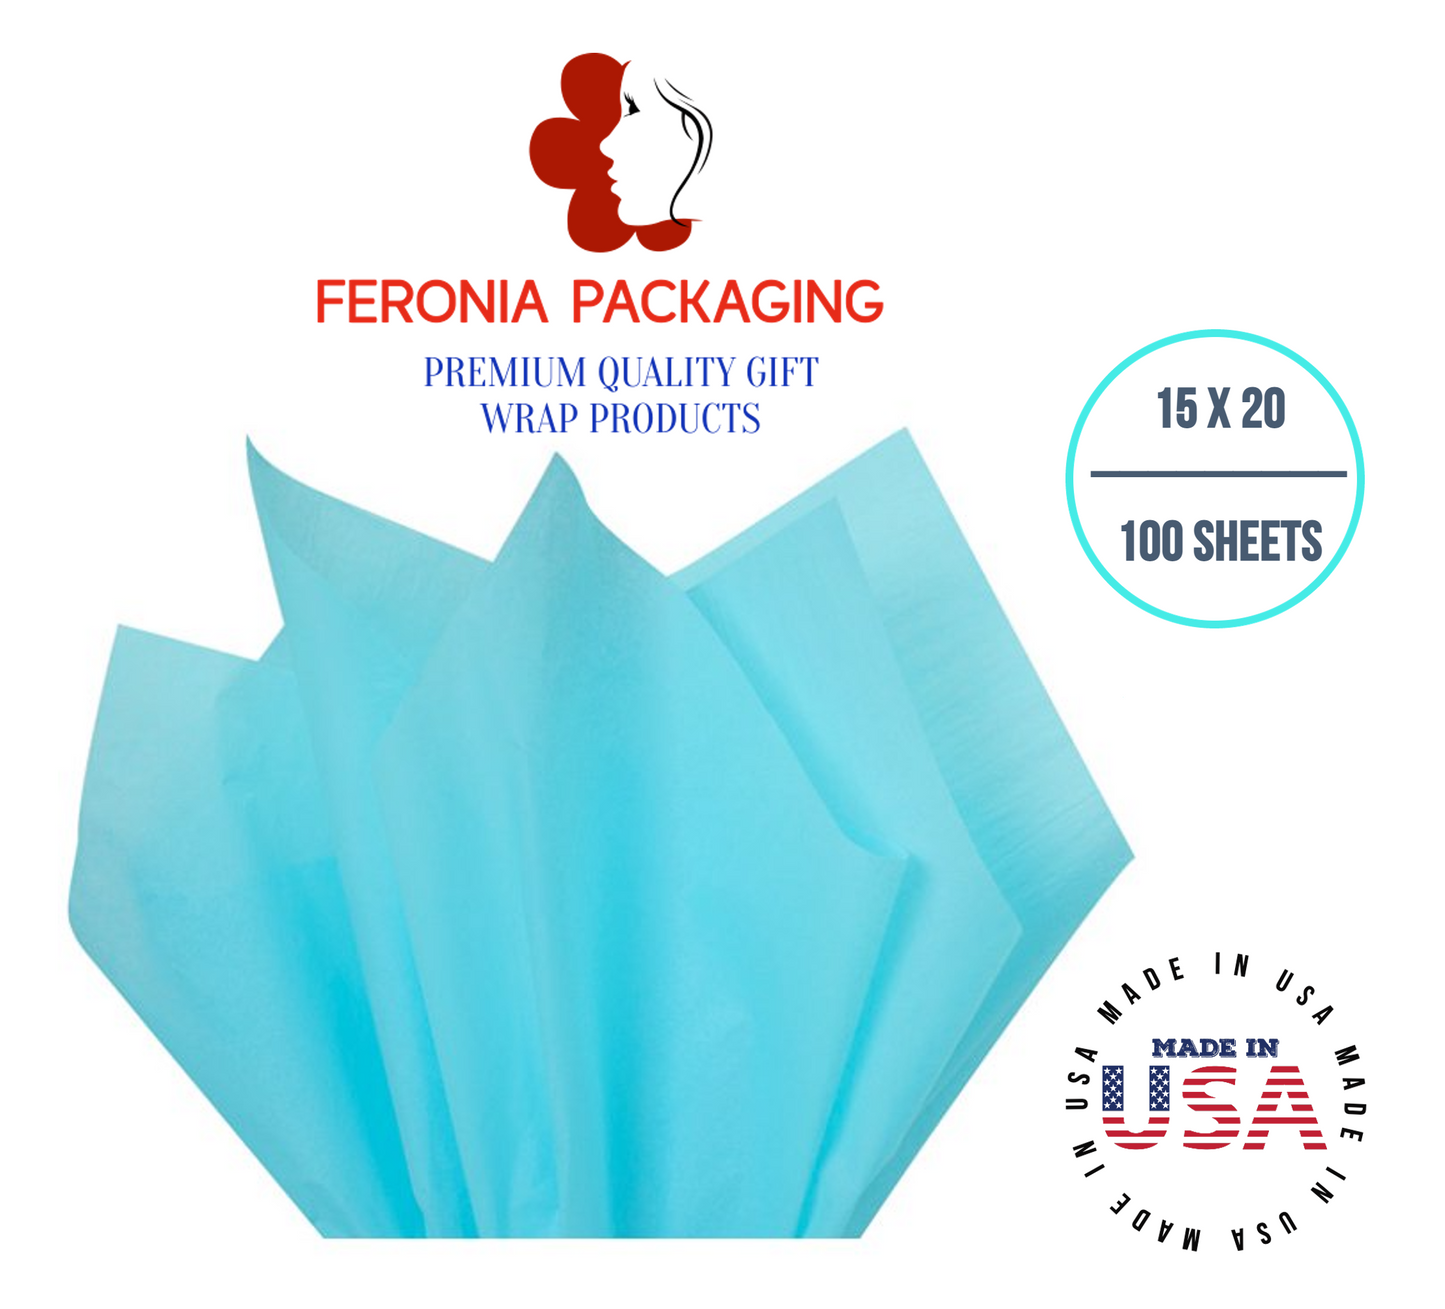 Oxford Blue Tissue Paper Squares, Bulk 100 Sheets, Premium Gift Wrap and Art Supplies for Birthdays, Holidays, or Presents by Feronia packaging, Large 15 Inch x 20 Inch